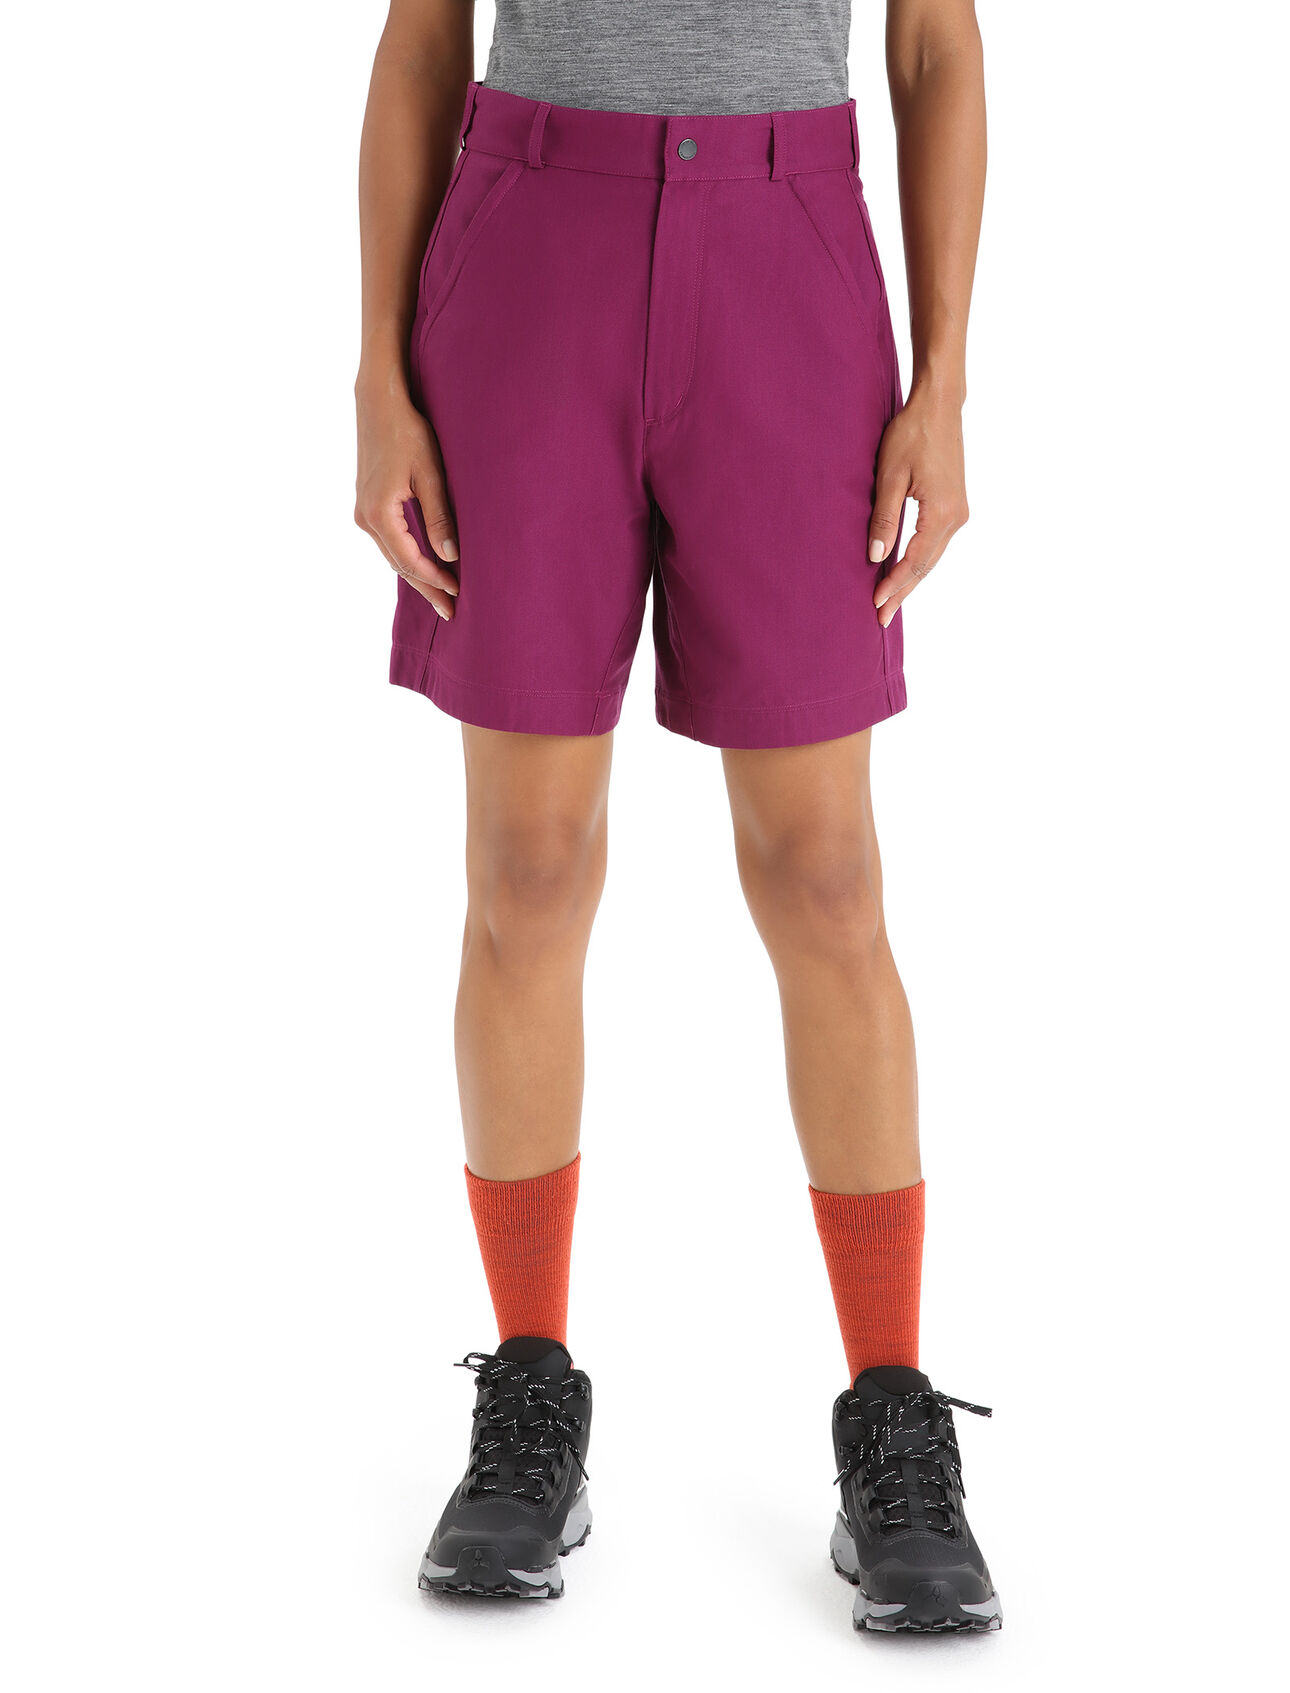 Womens Merino Hike Shorts A durable and dependable mountain short made from a unique blend of merino wool and organically grown cotton, the Hike Shorts are perfect for mountain adventures of all kinds. 